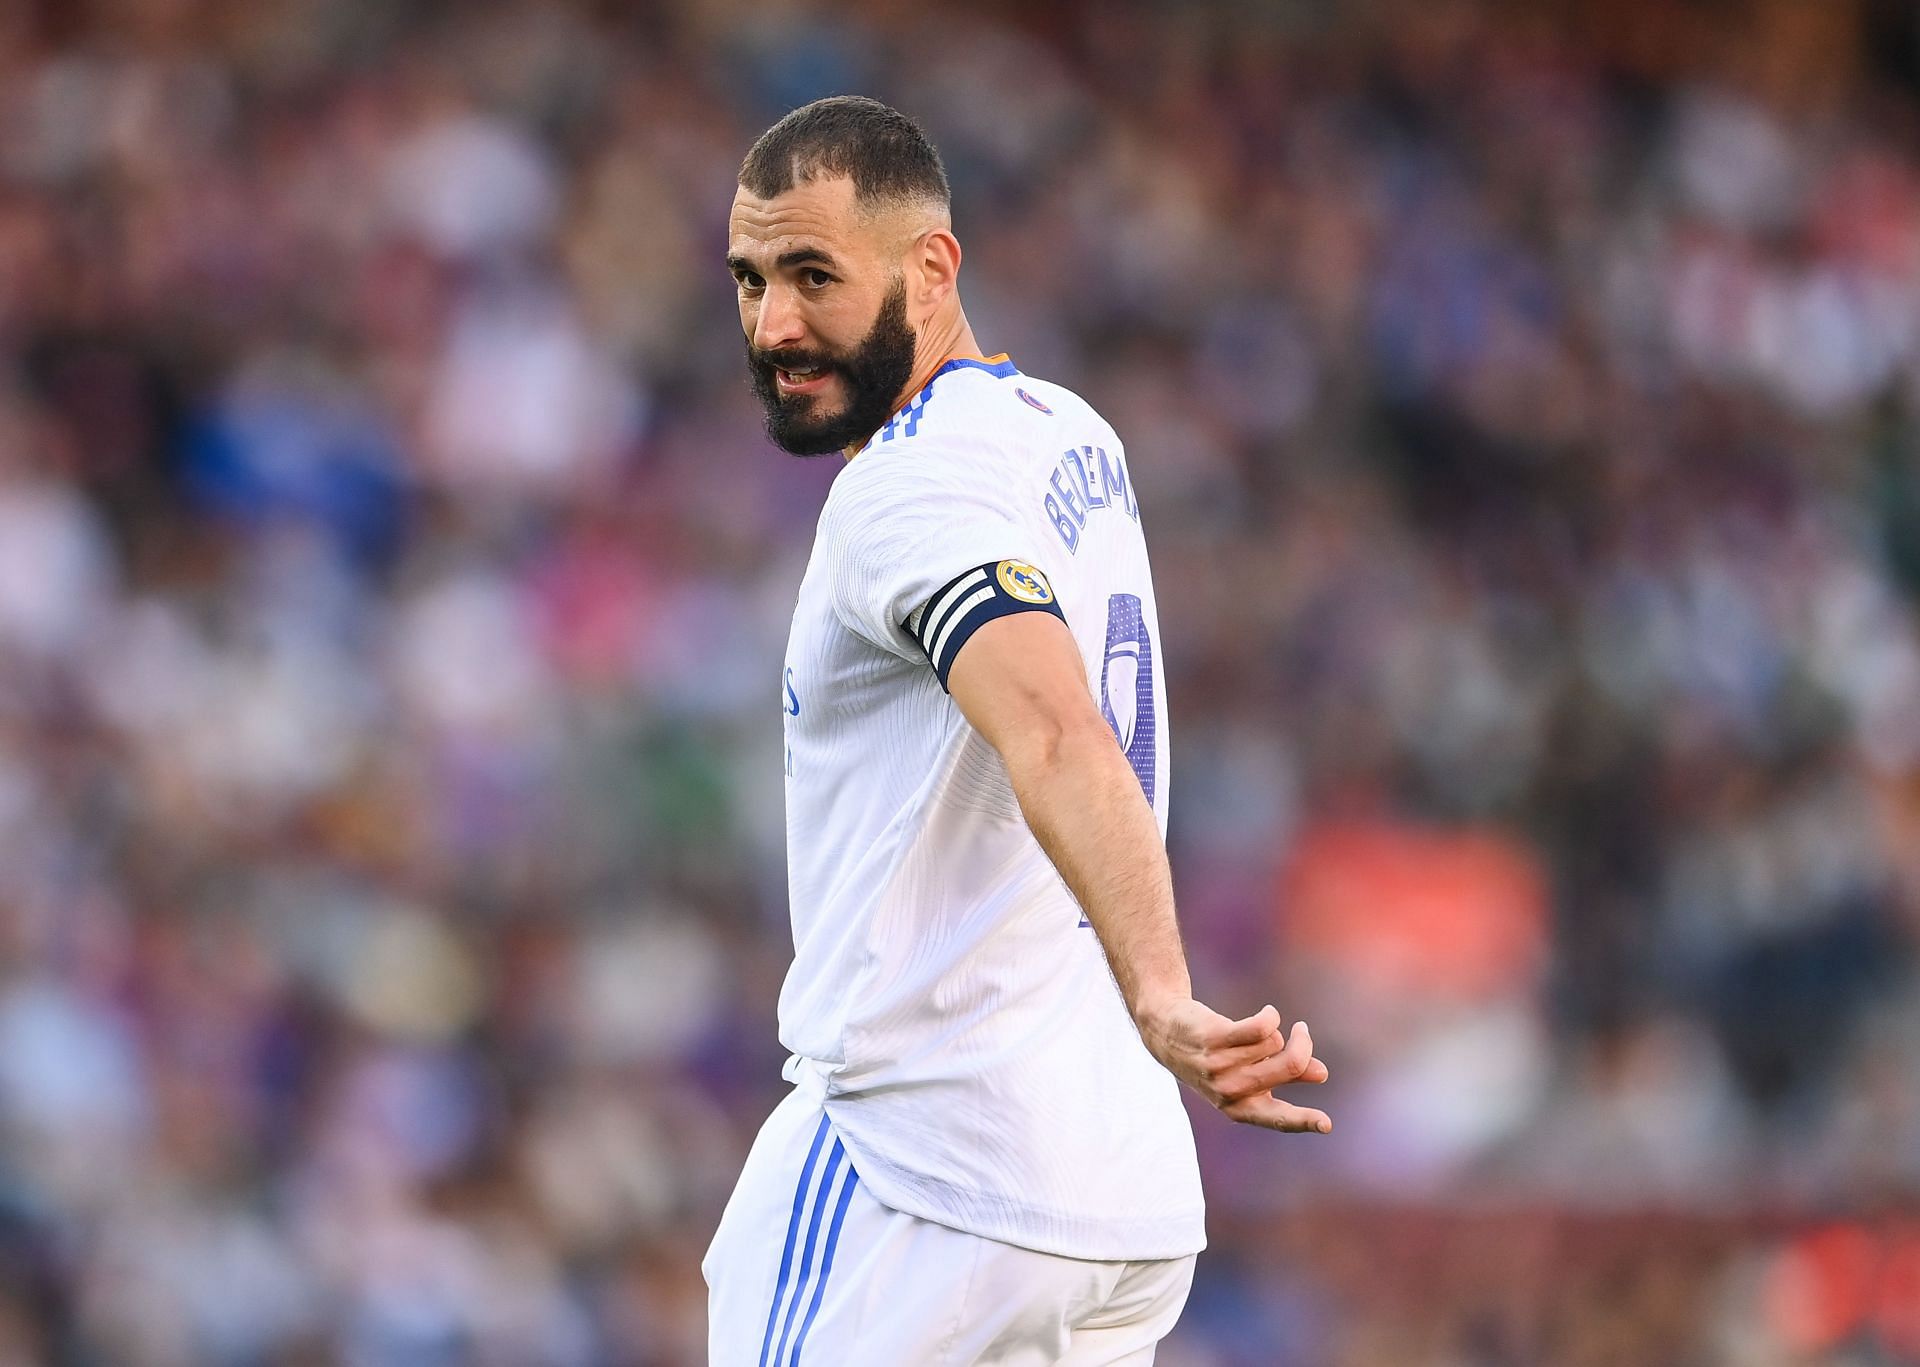 PSG are planning a move for Karim Benzema.